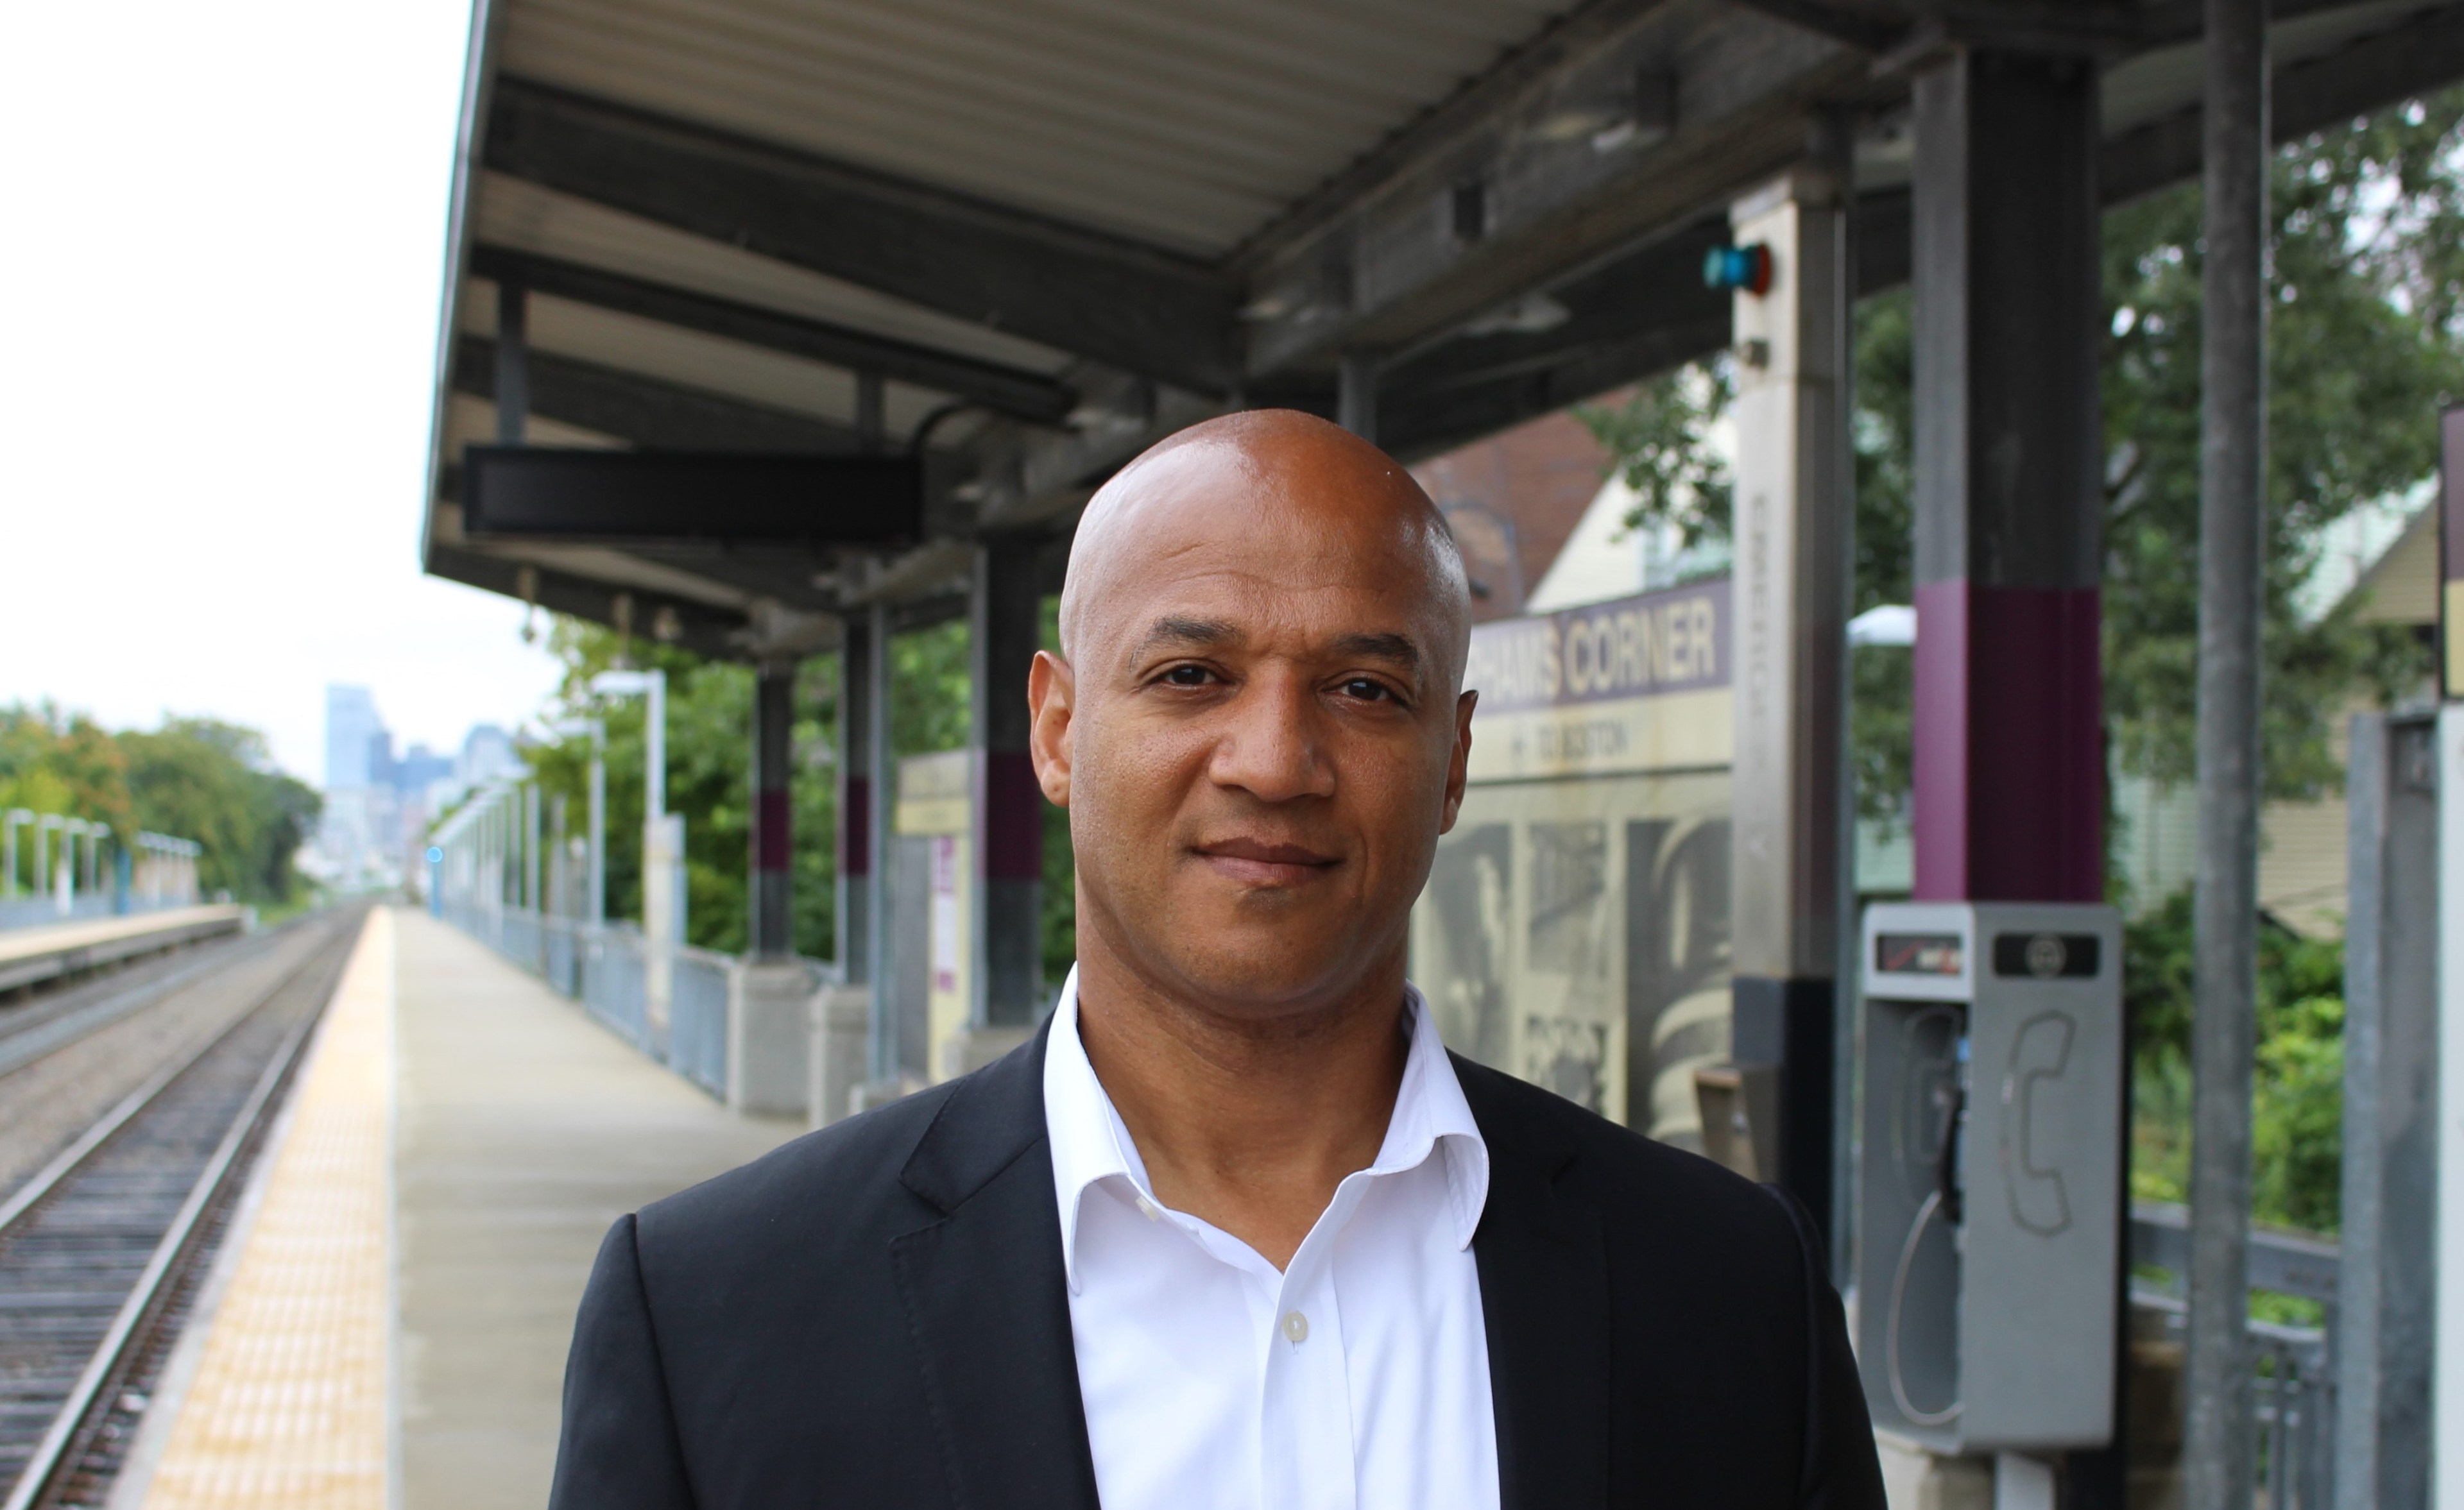 John Barros, candidate running to be Boston's next mayor, on the train platform at the Upham's Corner station.